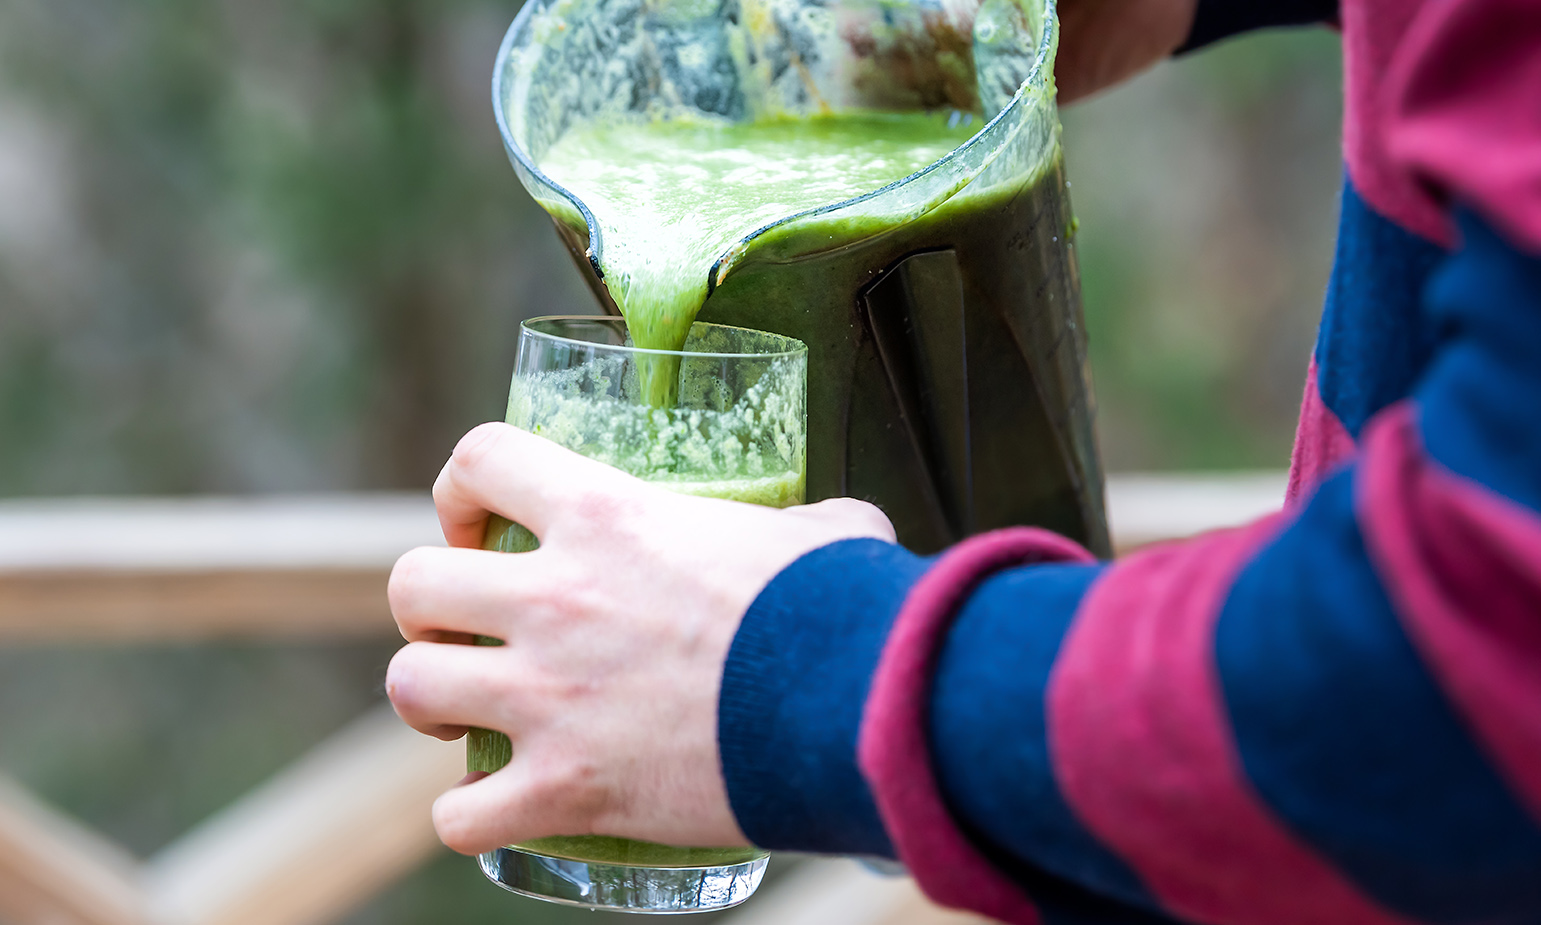 Person pouring healthy green drink from pitcher into glass